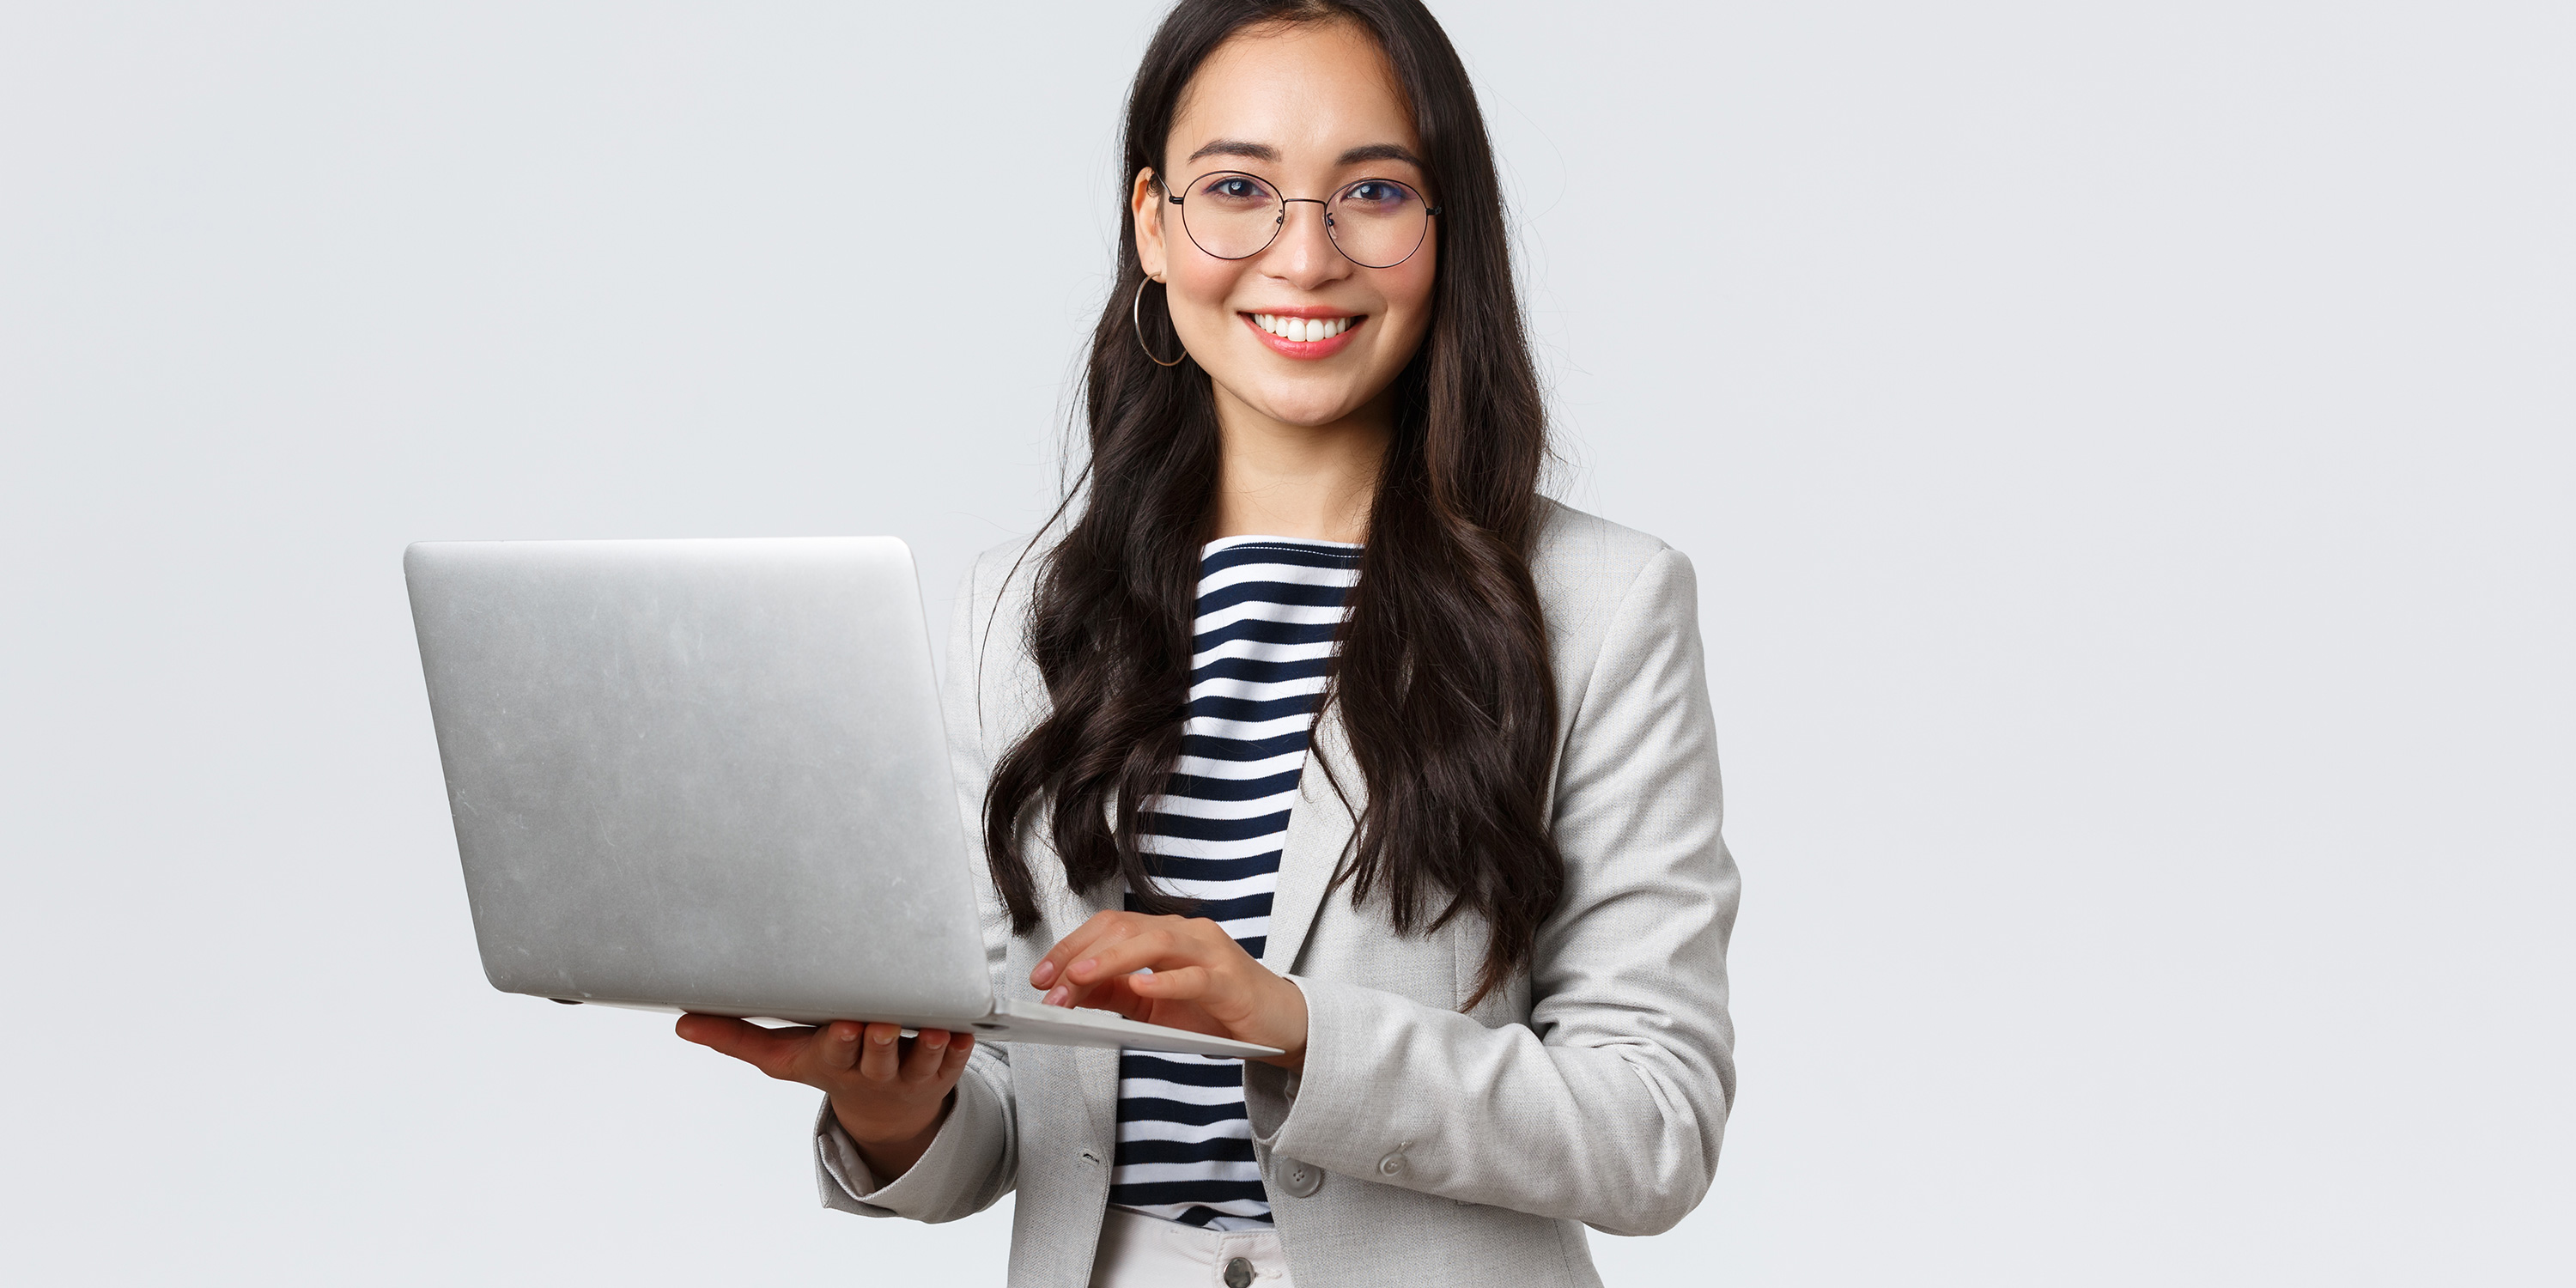 female with dark hair smiling and holding a laptop